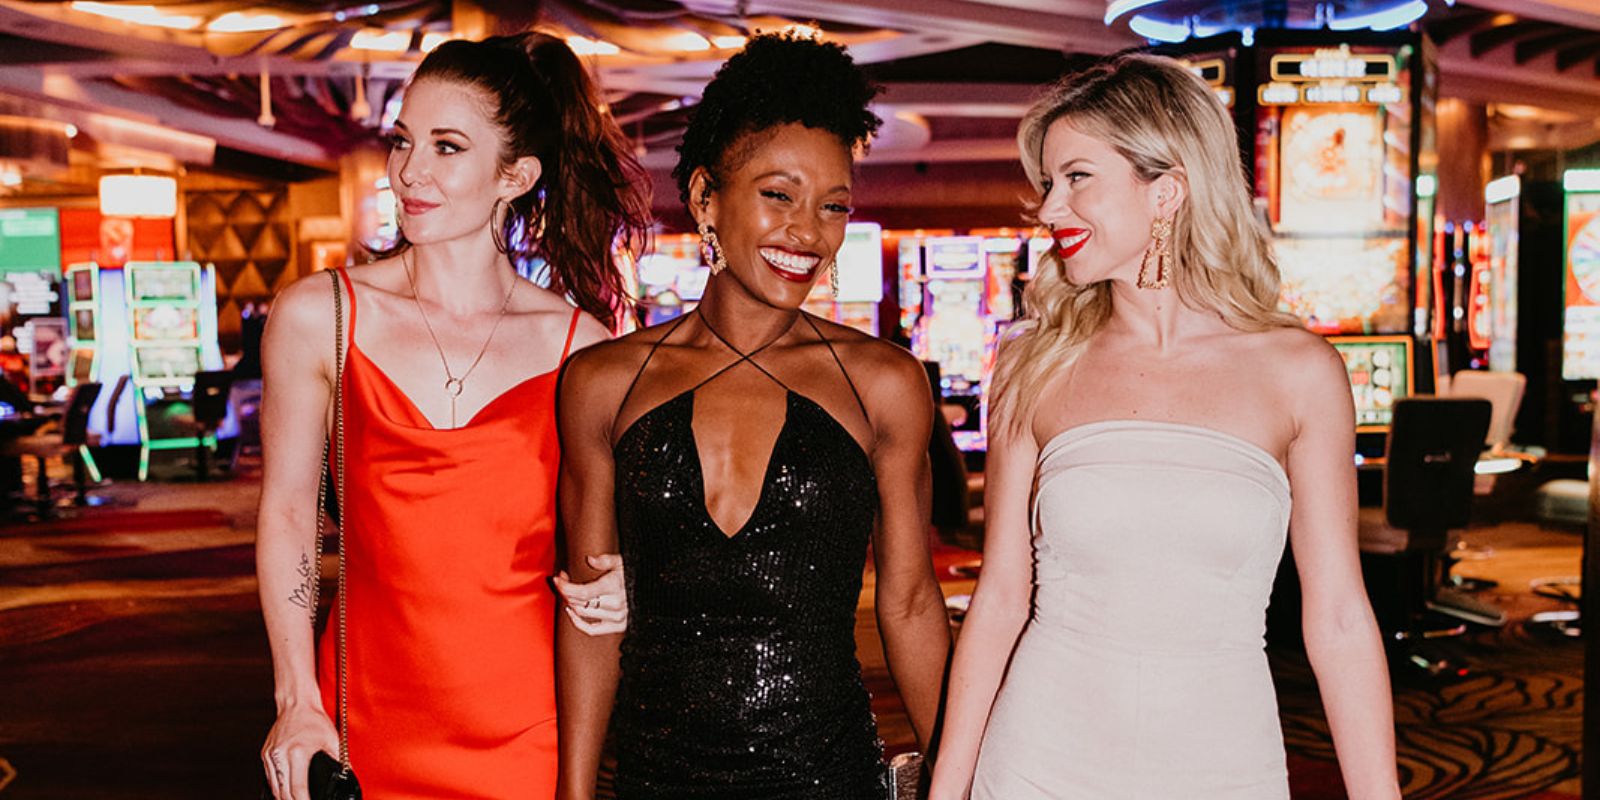 3 women walking arm in arm on the casino floor laughing and smiling